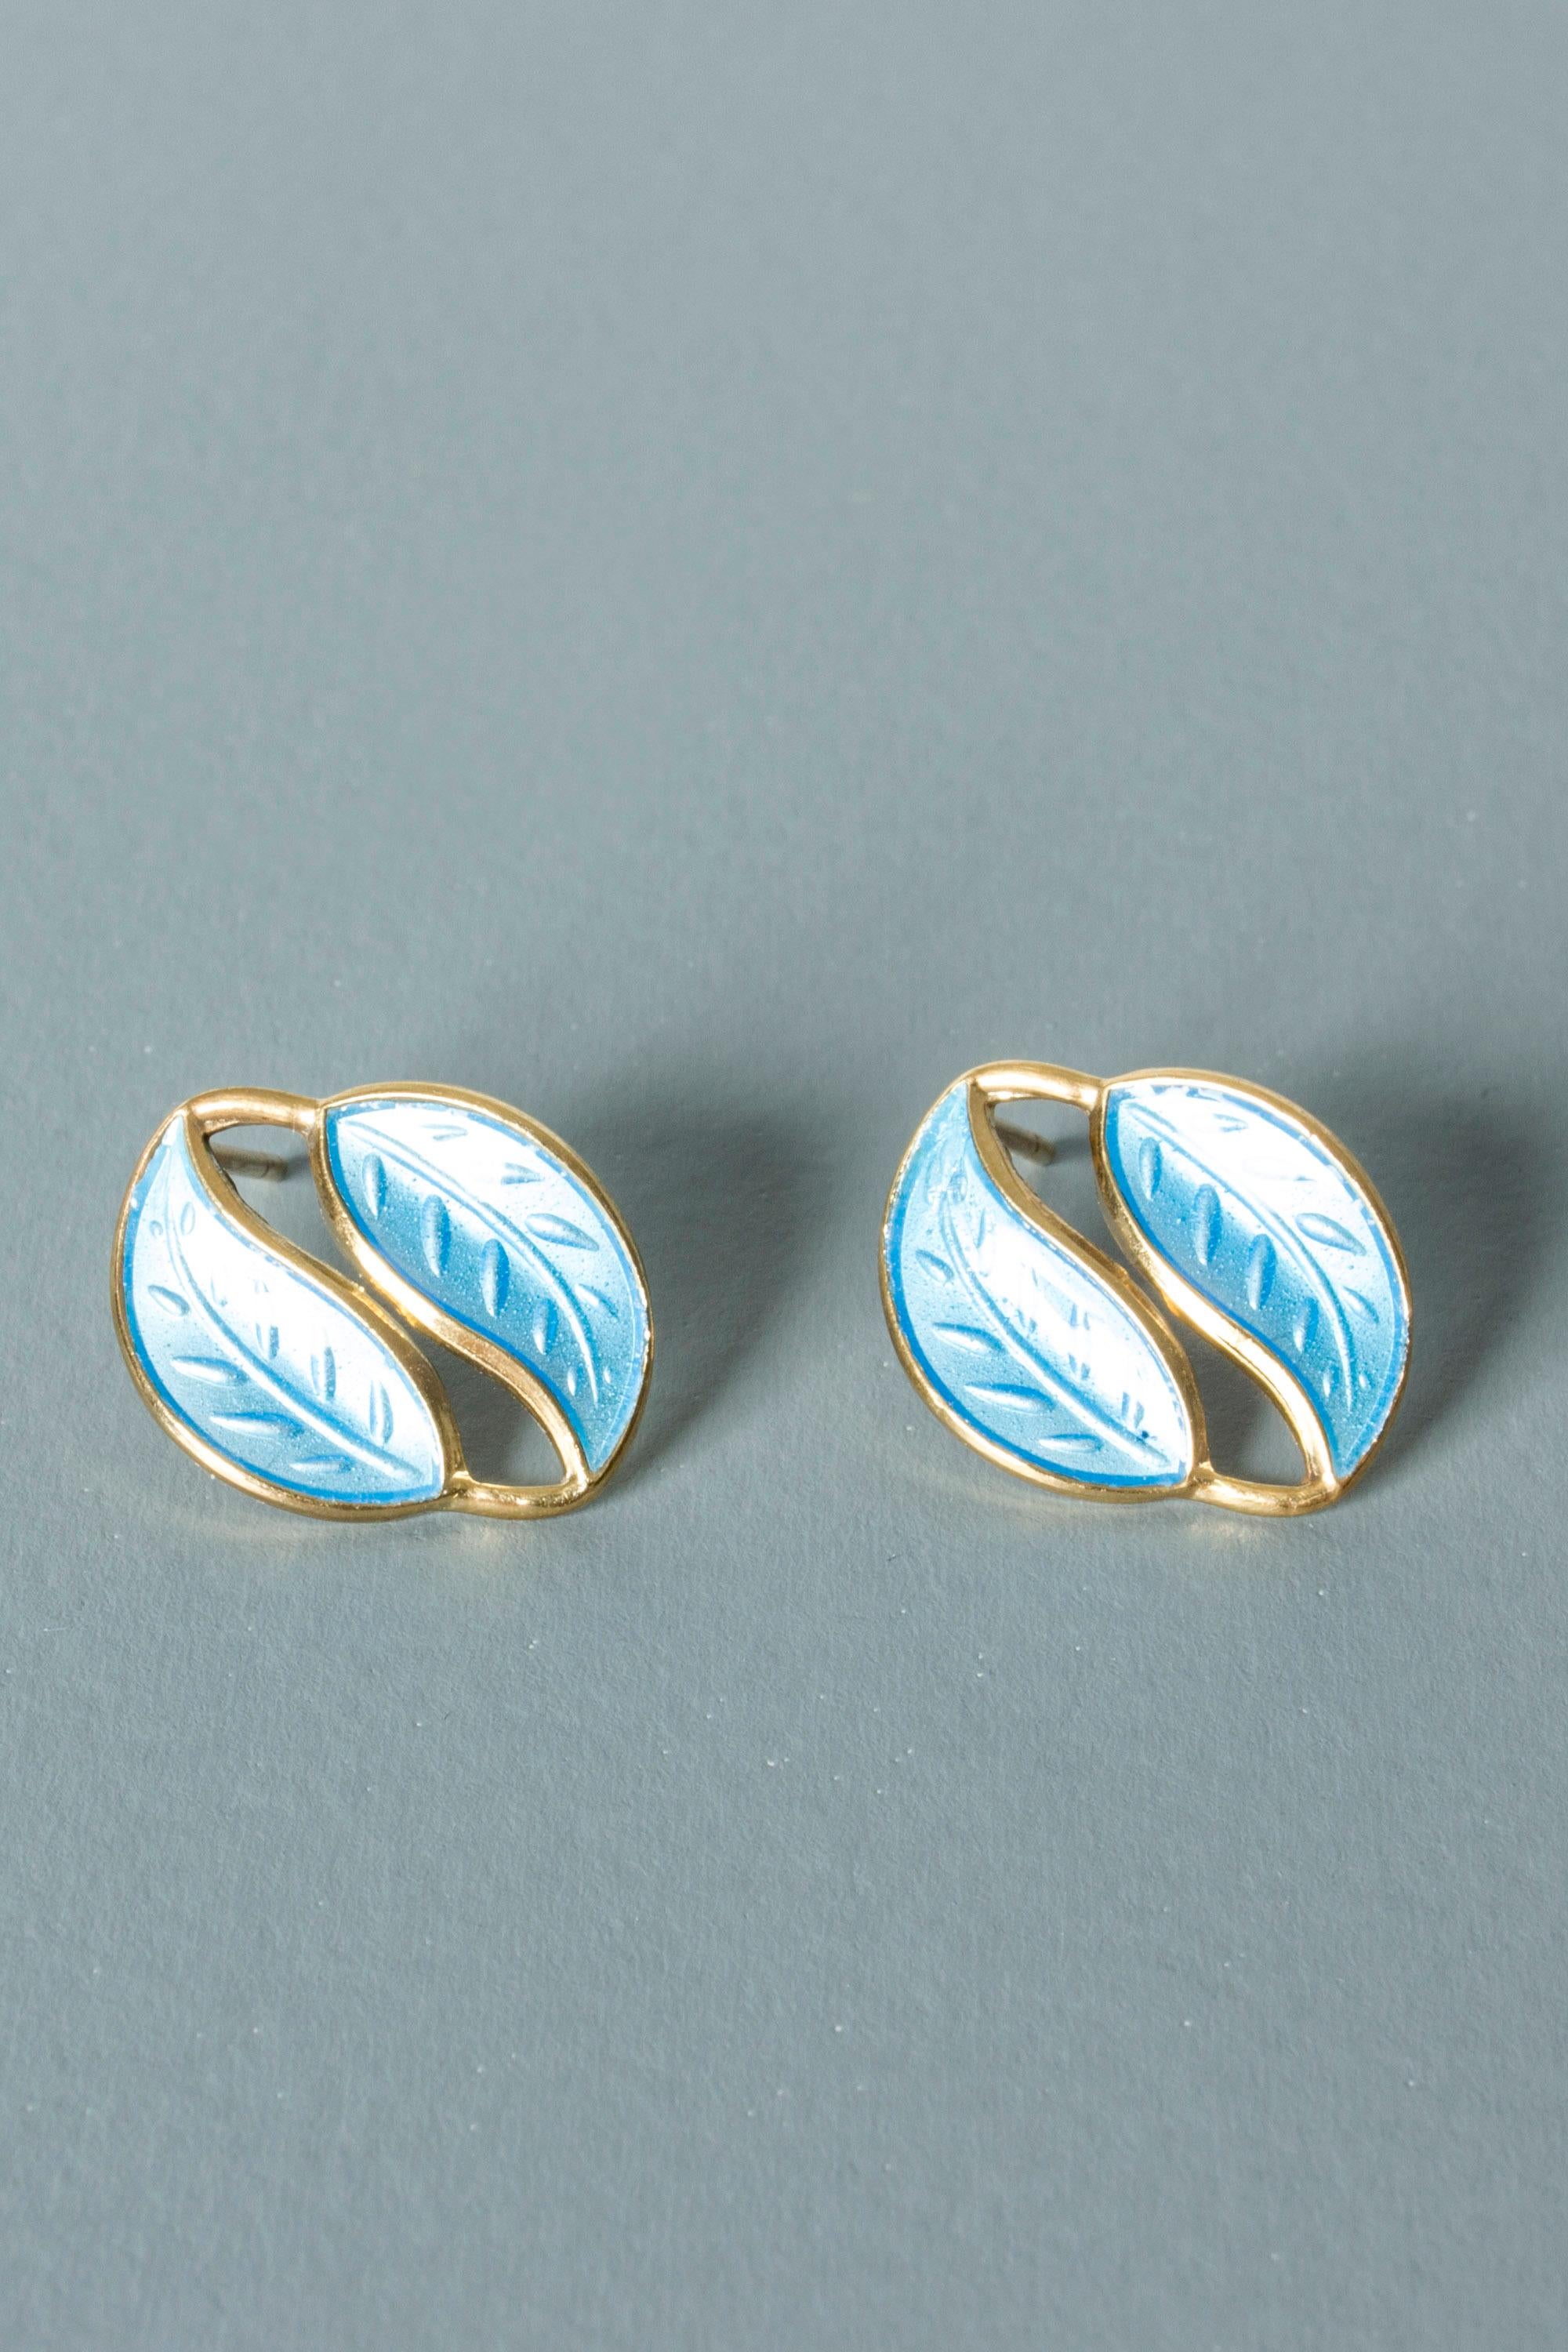 Pair of lovely silver earrings from David Andersen. Gilded with luminous blue enamel on the little leaves. Beautiful combination of materials.